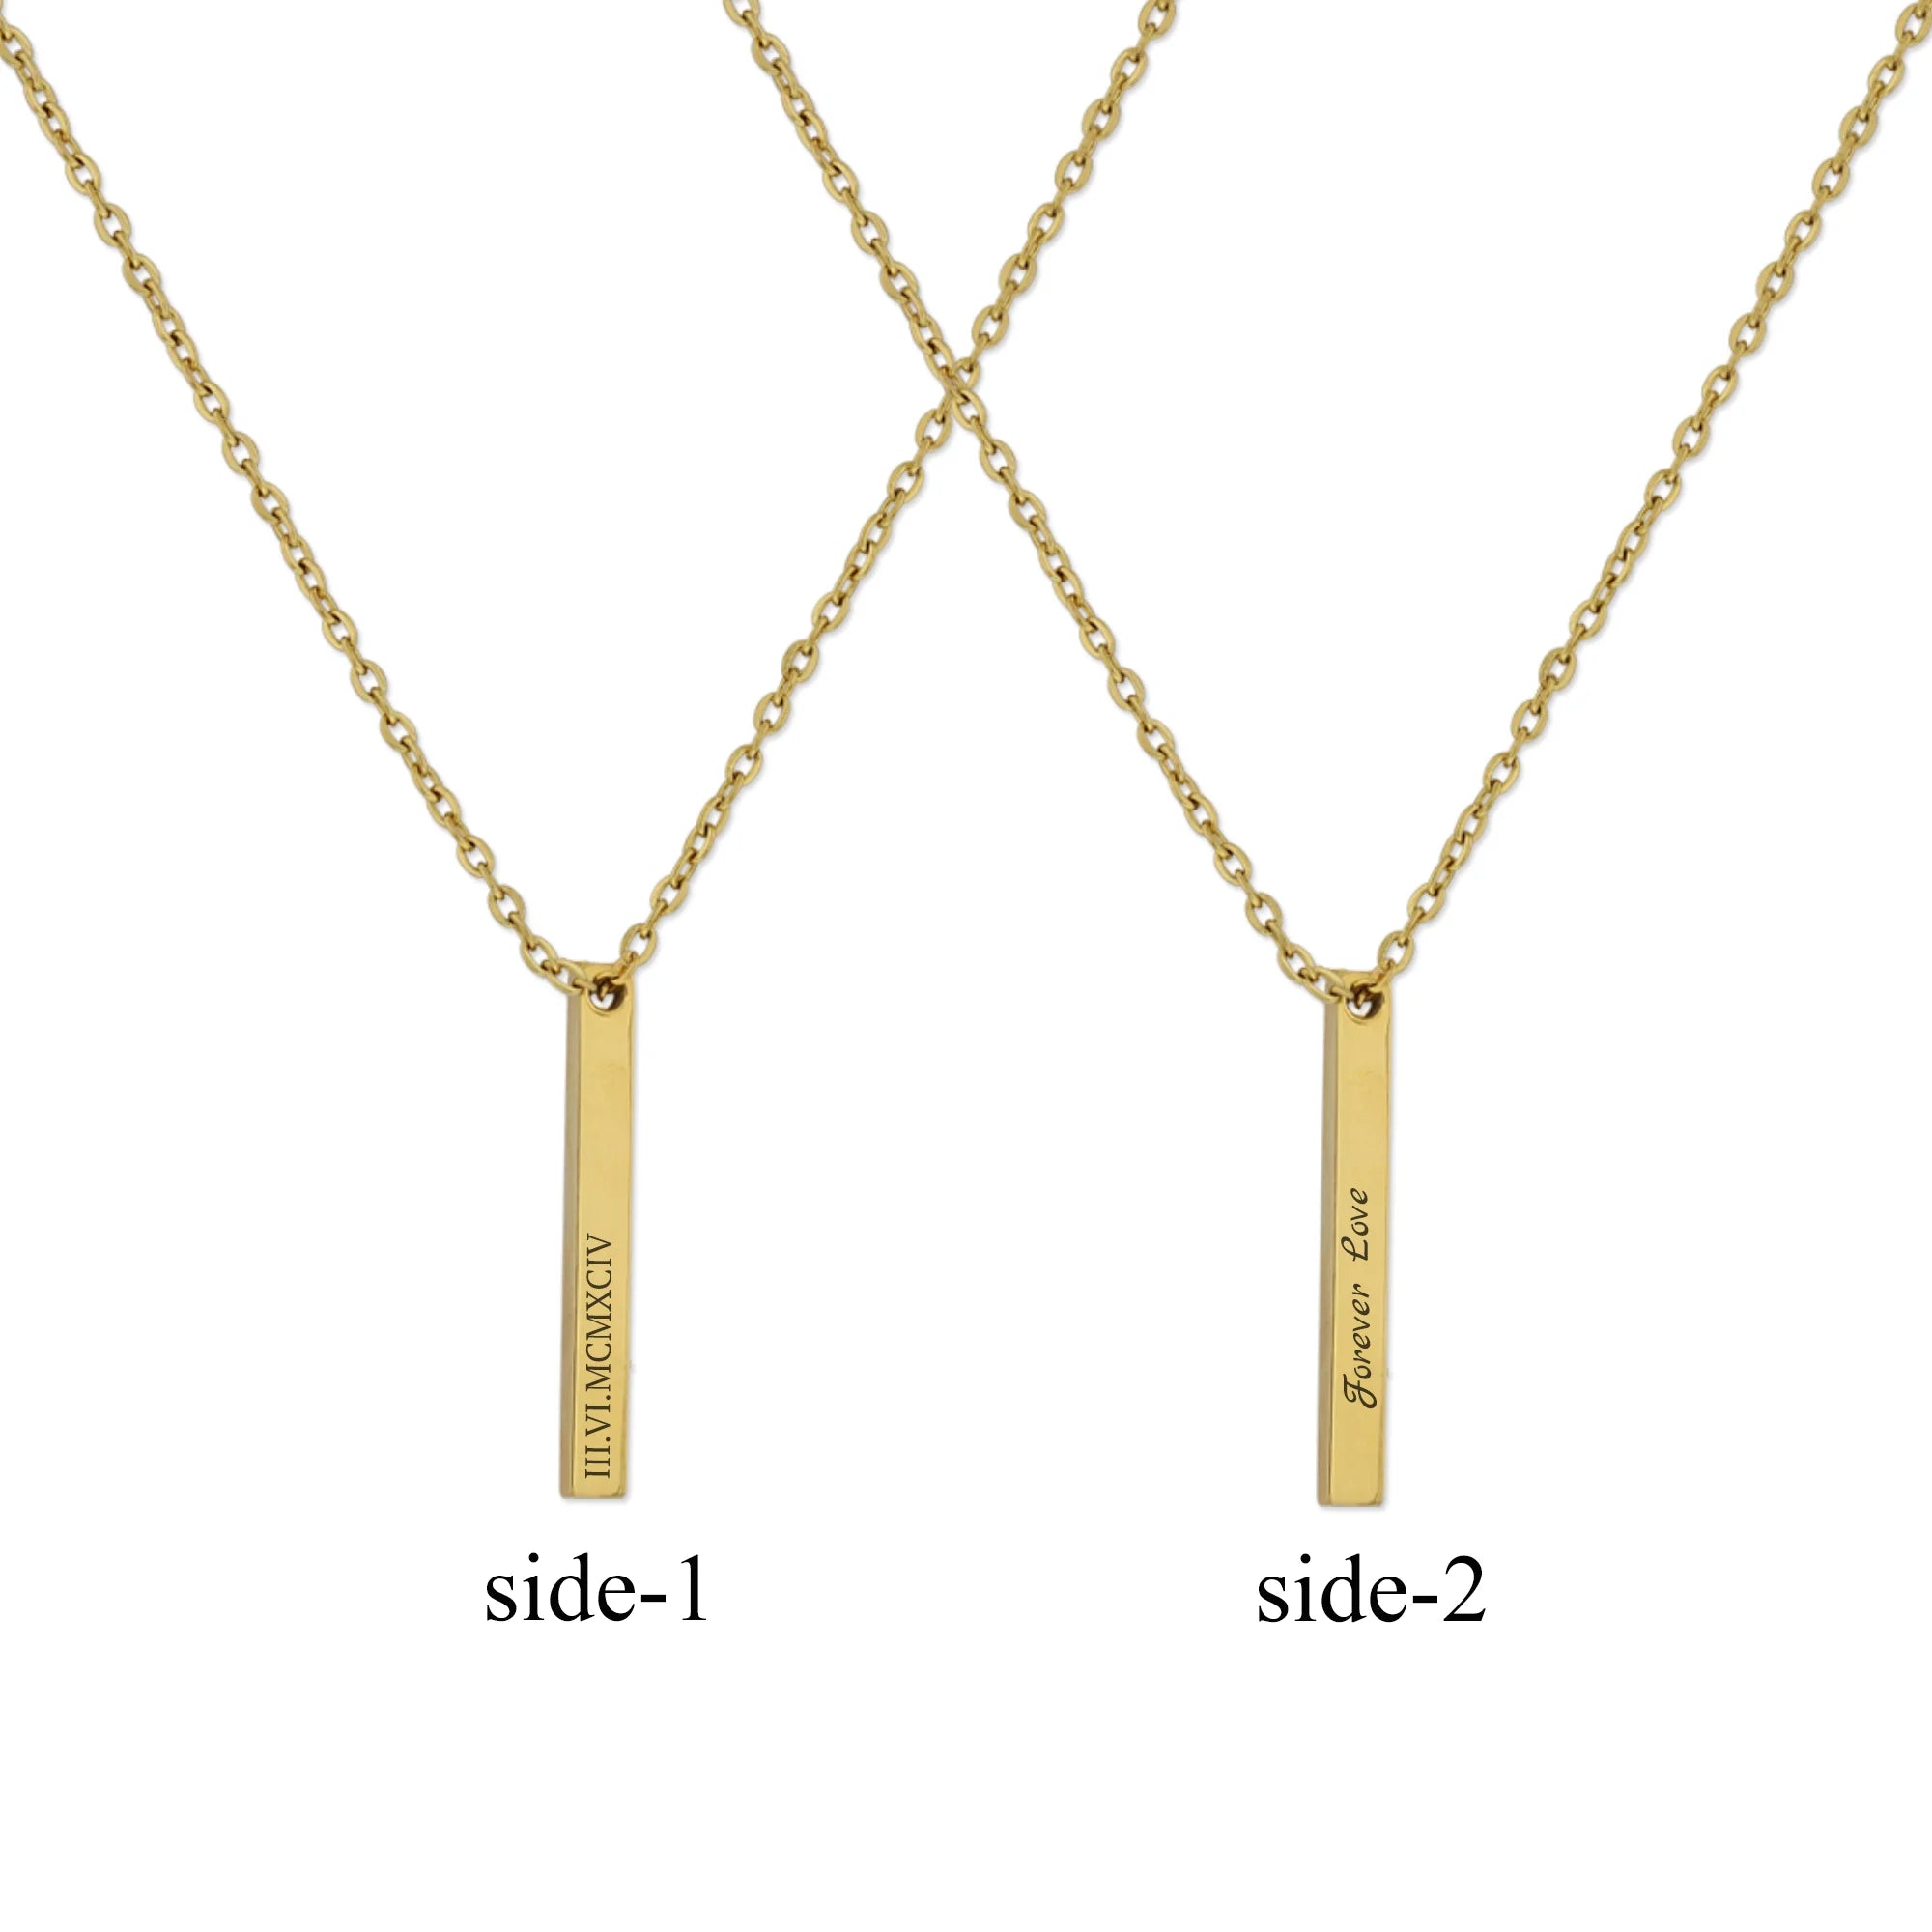 3D Bar Necklace,4 side necklace,Date Necklace,Minimalist Necklace,Necklace for women,Signature Necklace,coordinate necklace,custom name necklace,engraved necklace,gift for boyfriend,gift for men,gold bar necklace,his and hers gifts